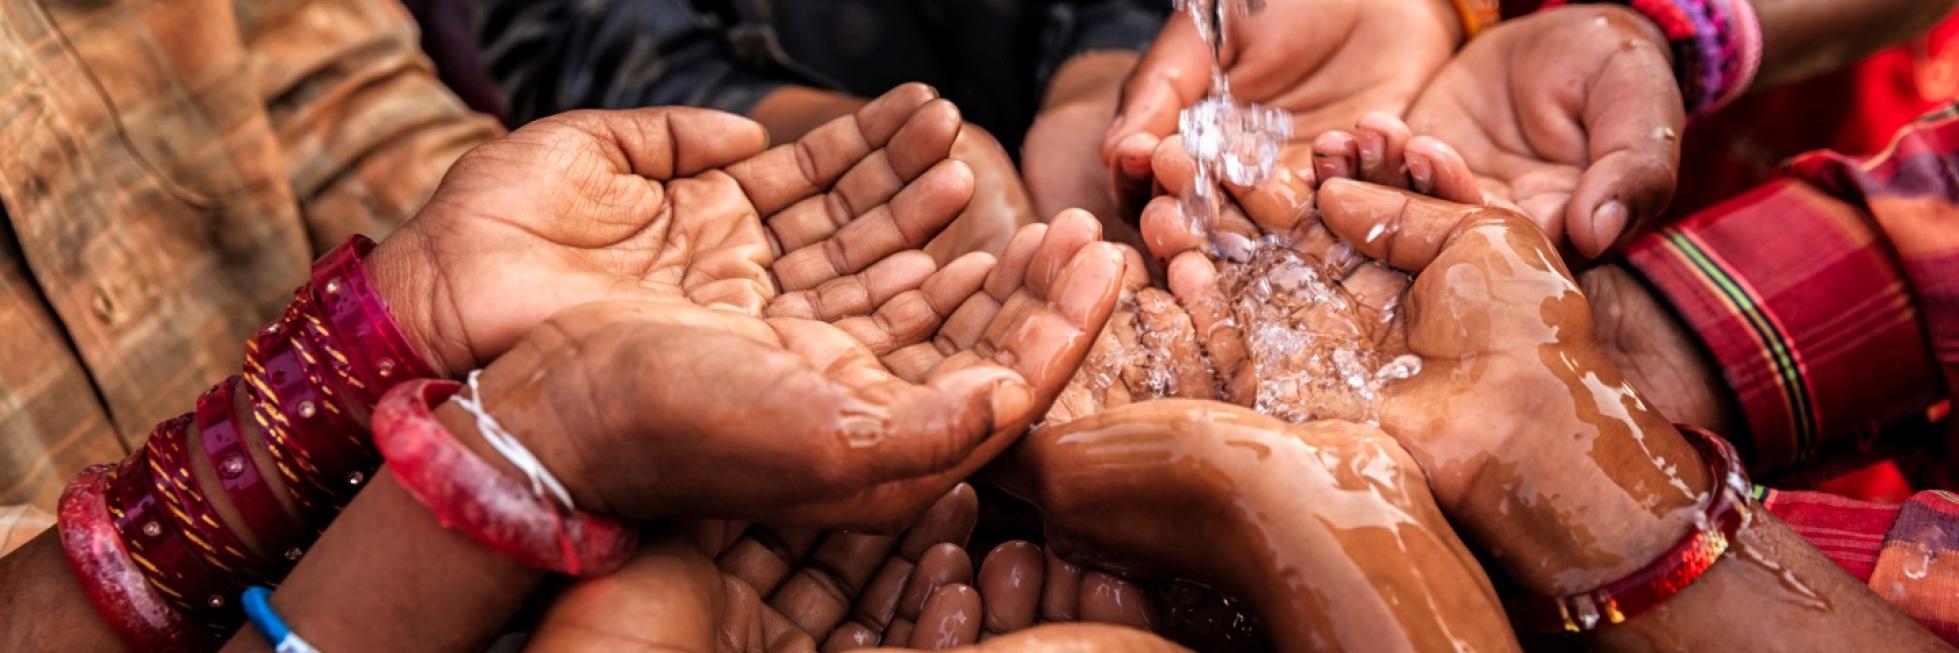 Several hands reaching water